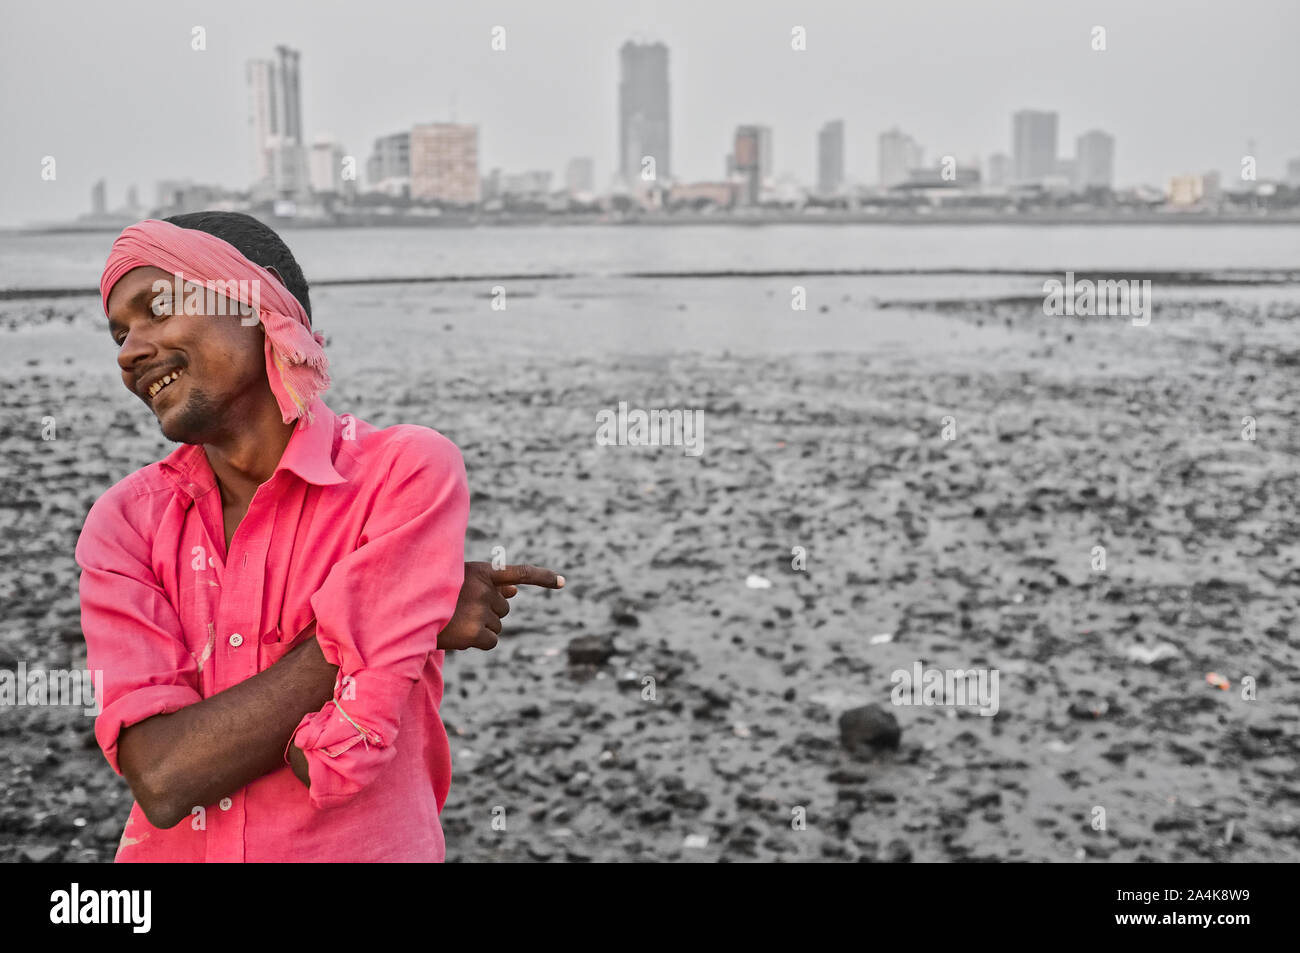 A beggar, lower left arm amputated, standing next to murky Worli Bay, near Haji Ali Mosque, Mumbai, India, pointing at the nearby muck and joking Stock Photo